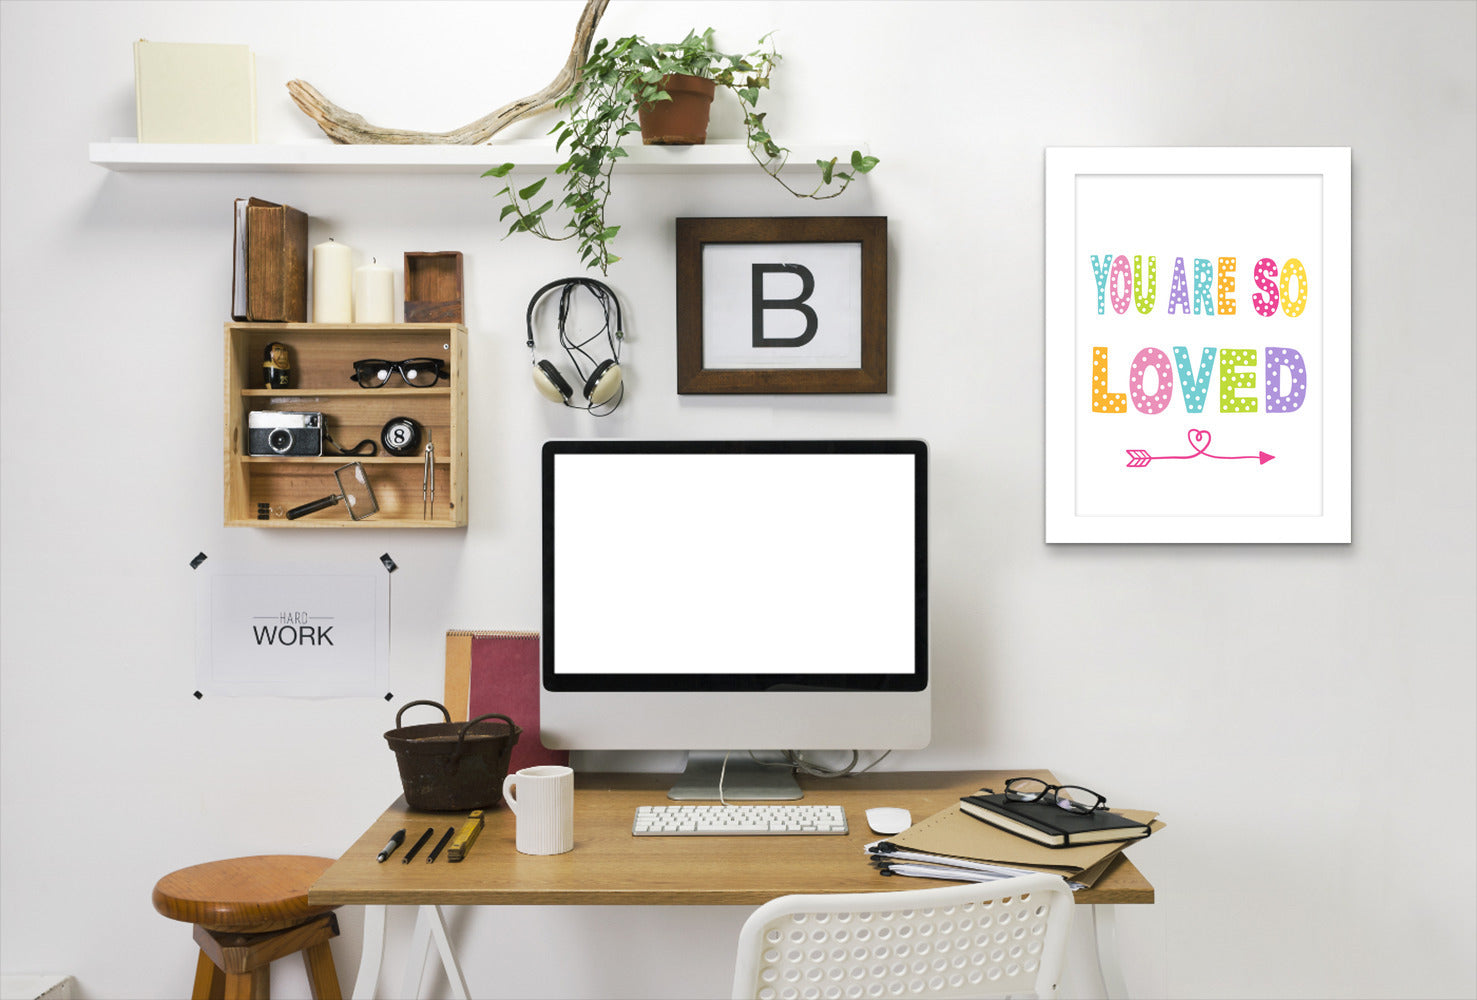 You Are Loved By Lisa Nohren - White Framed Print - Wall Art - Americanflat